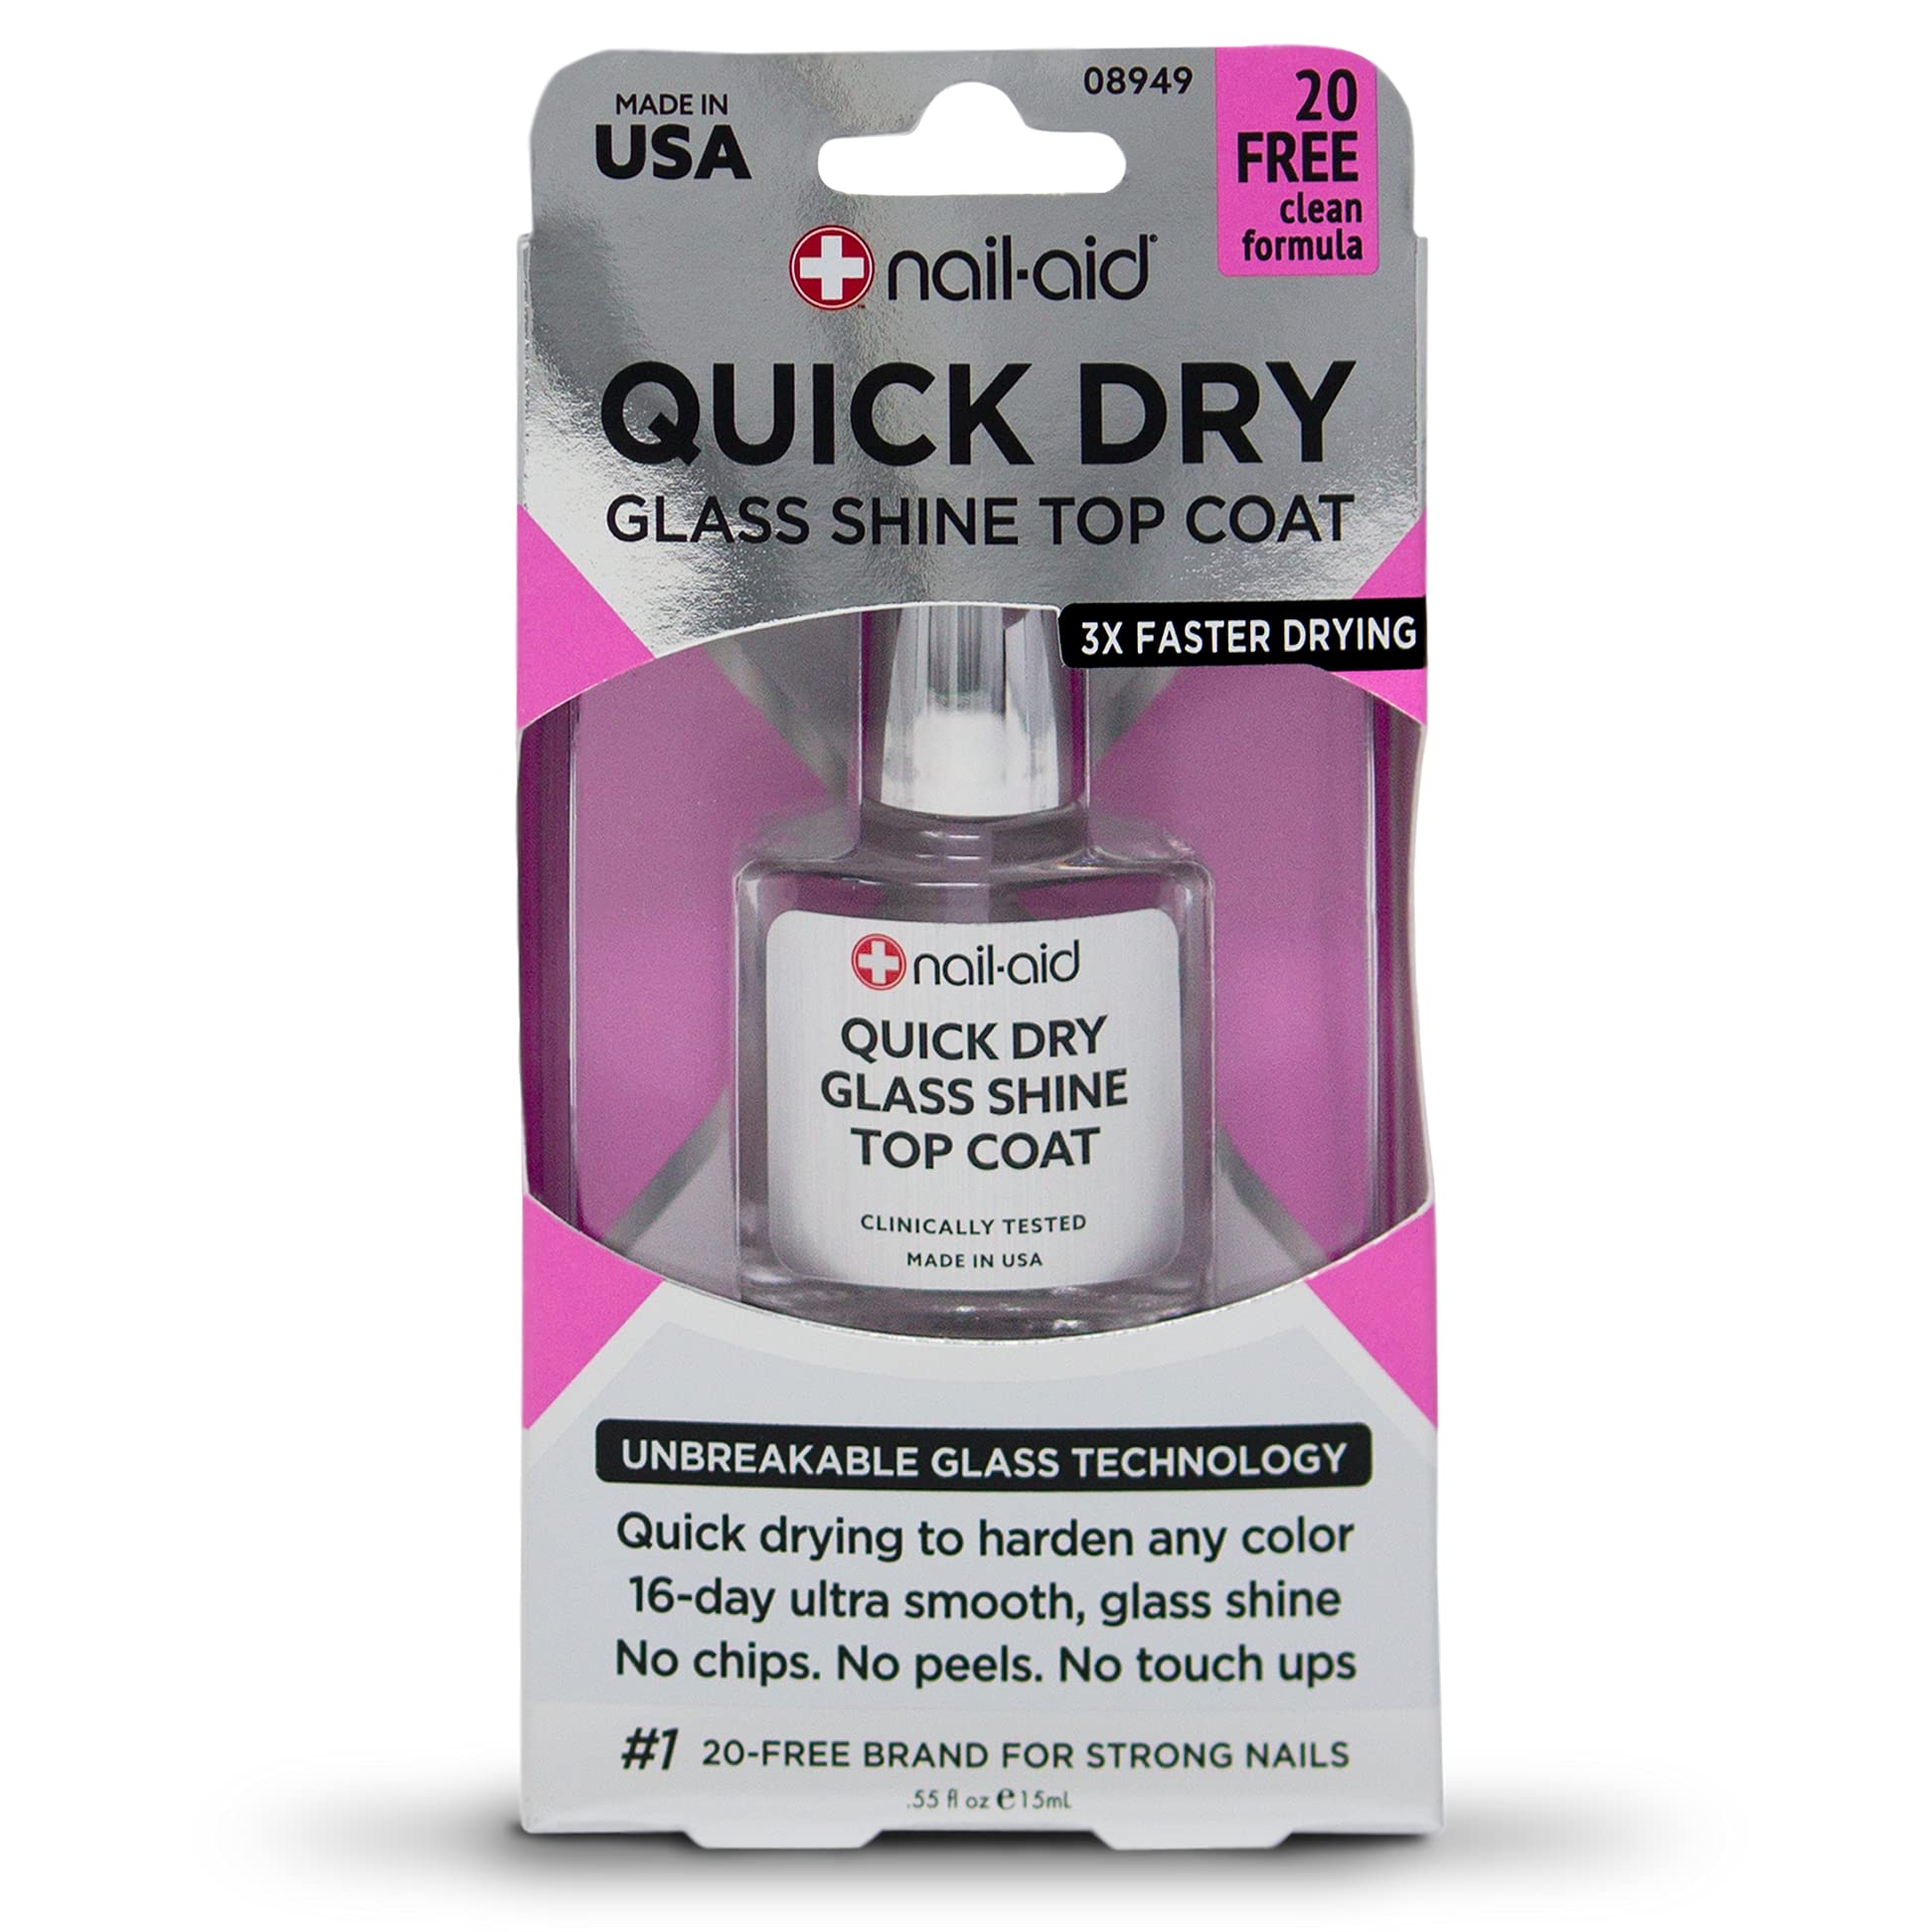 Nail-Aid Quick Dry Glass Shine Top Coat Long Wear Scratch Resistant Color  Clear 0.55 Fl Oz 0.55 Fl Oz (Pack of 1)